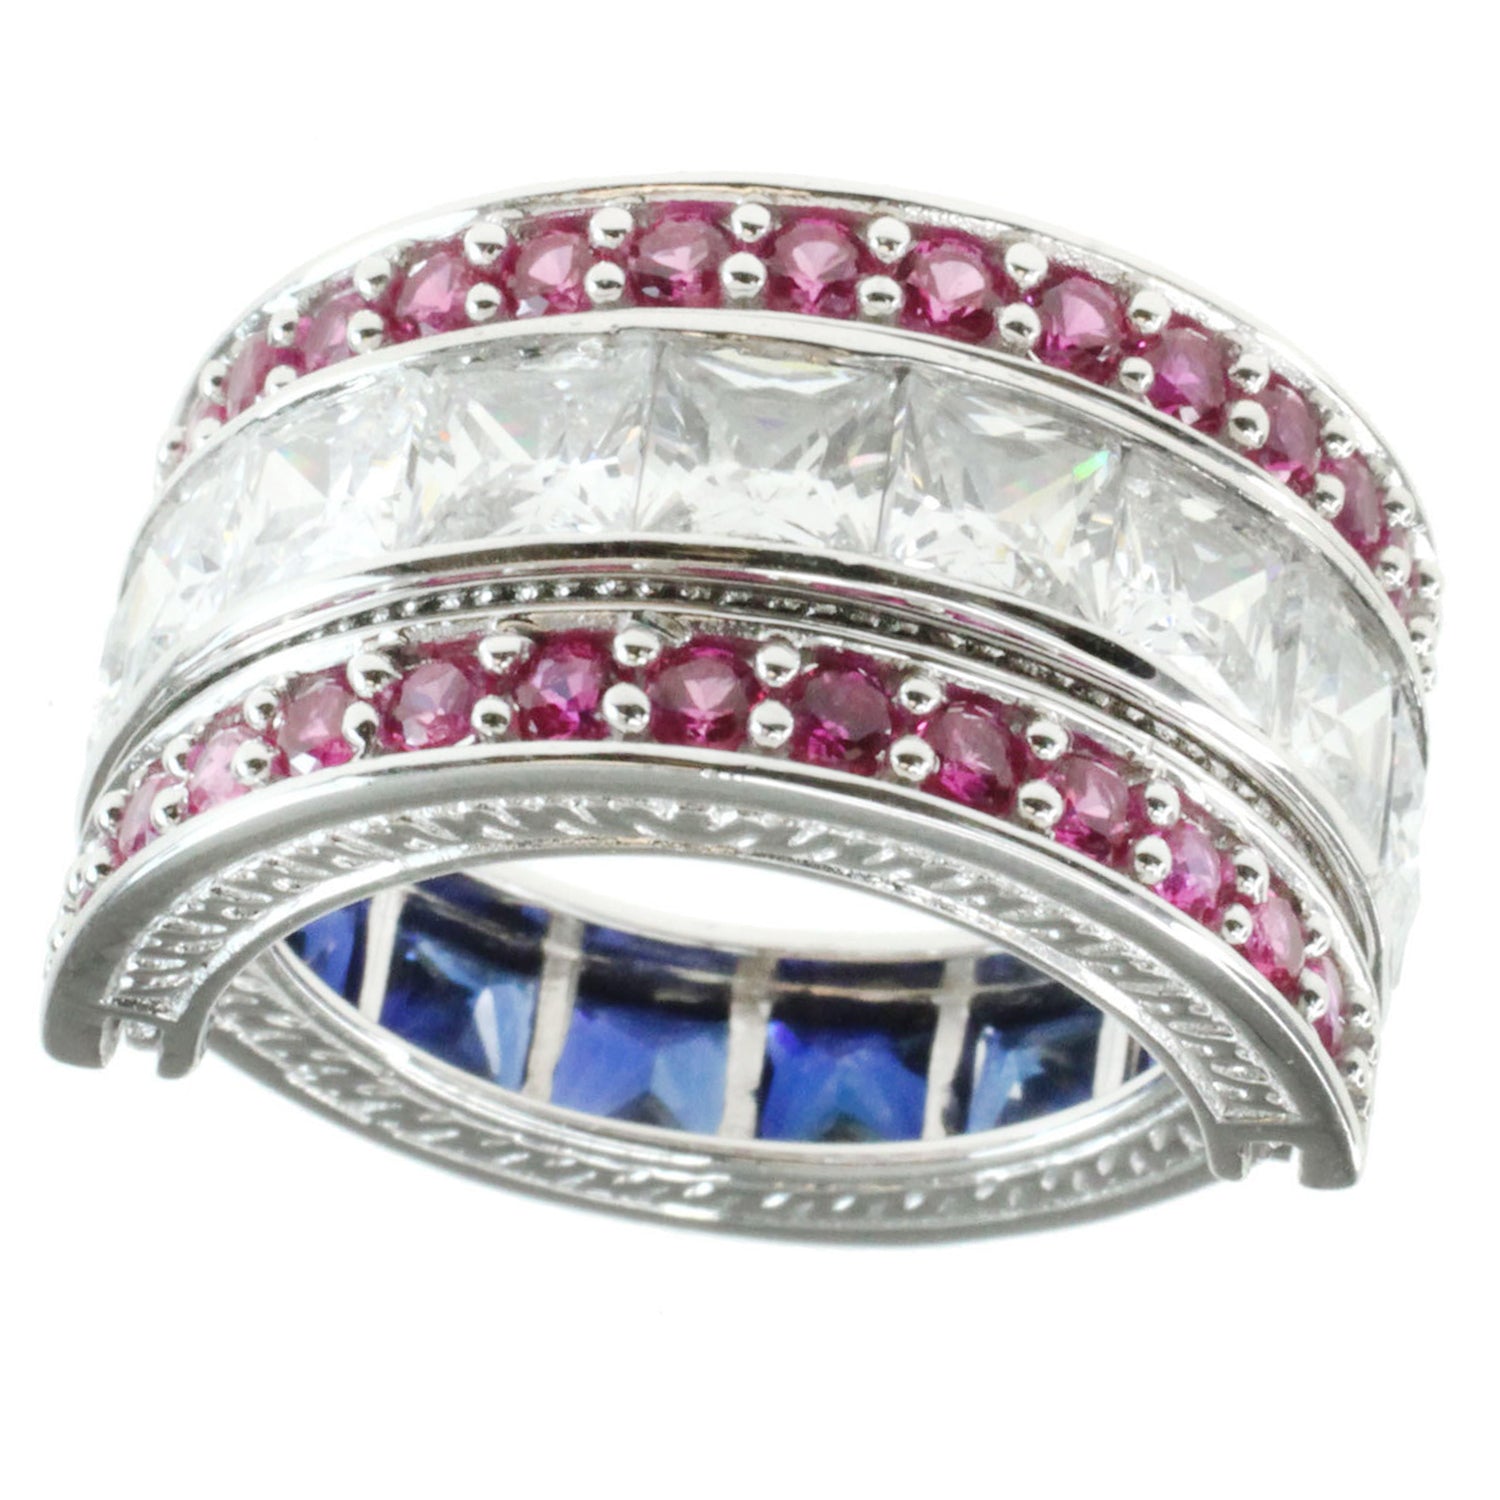 Signity Sterling Silver Cubic Zirconia Multi-stone Flip Ring - CANNOT BE RESIZED.